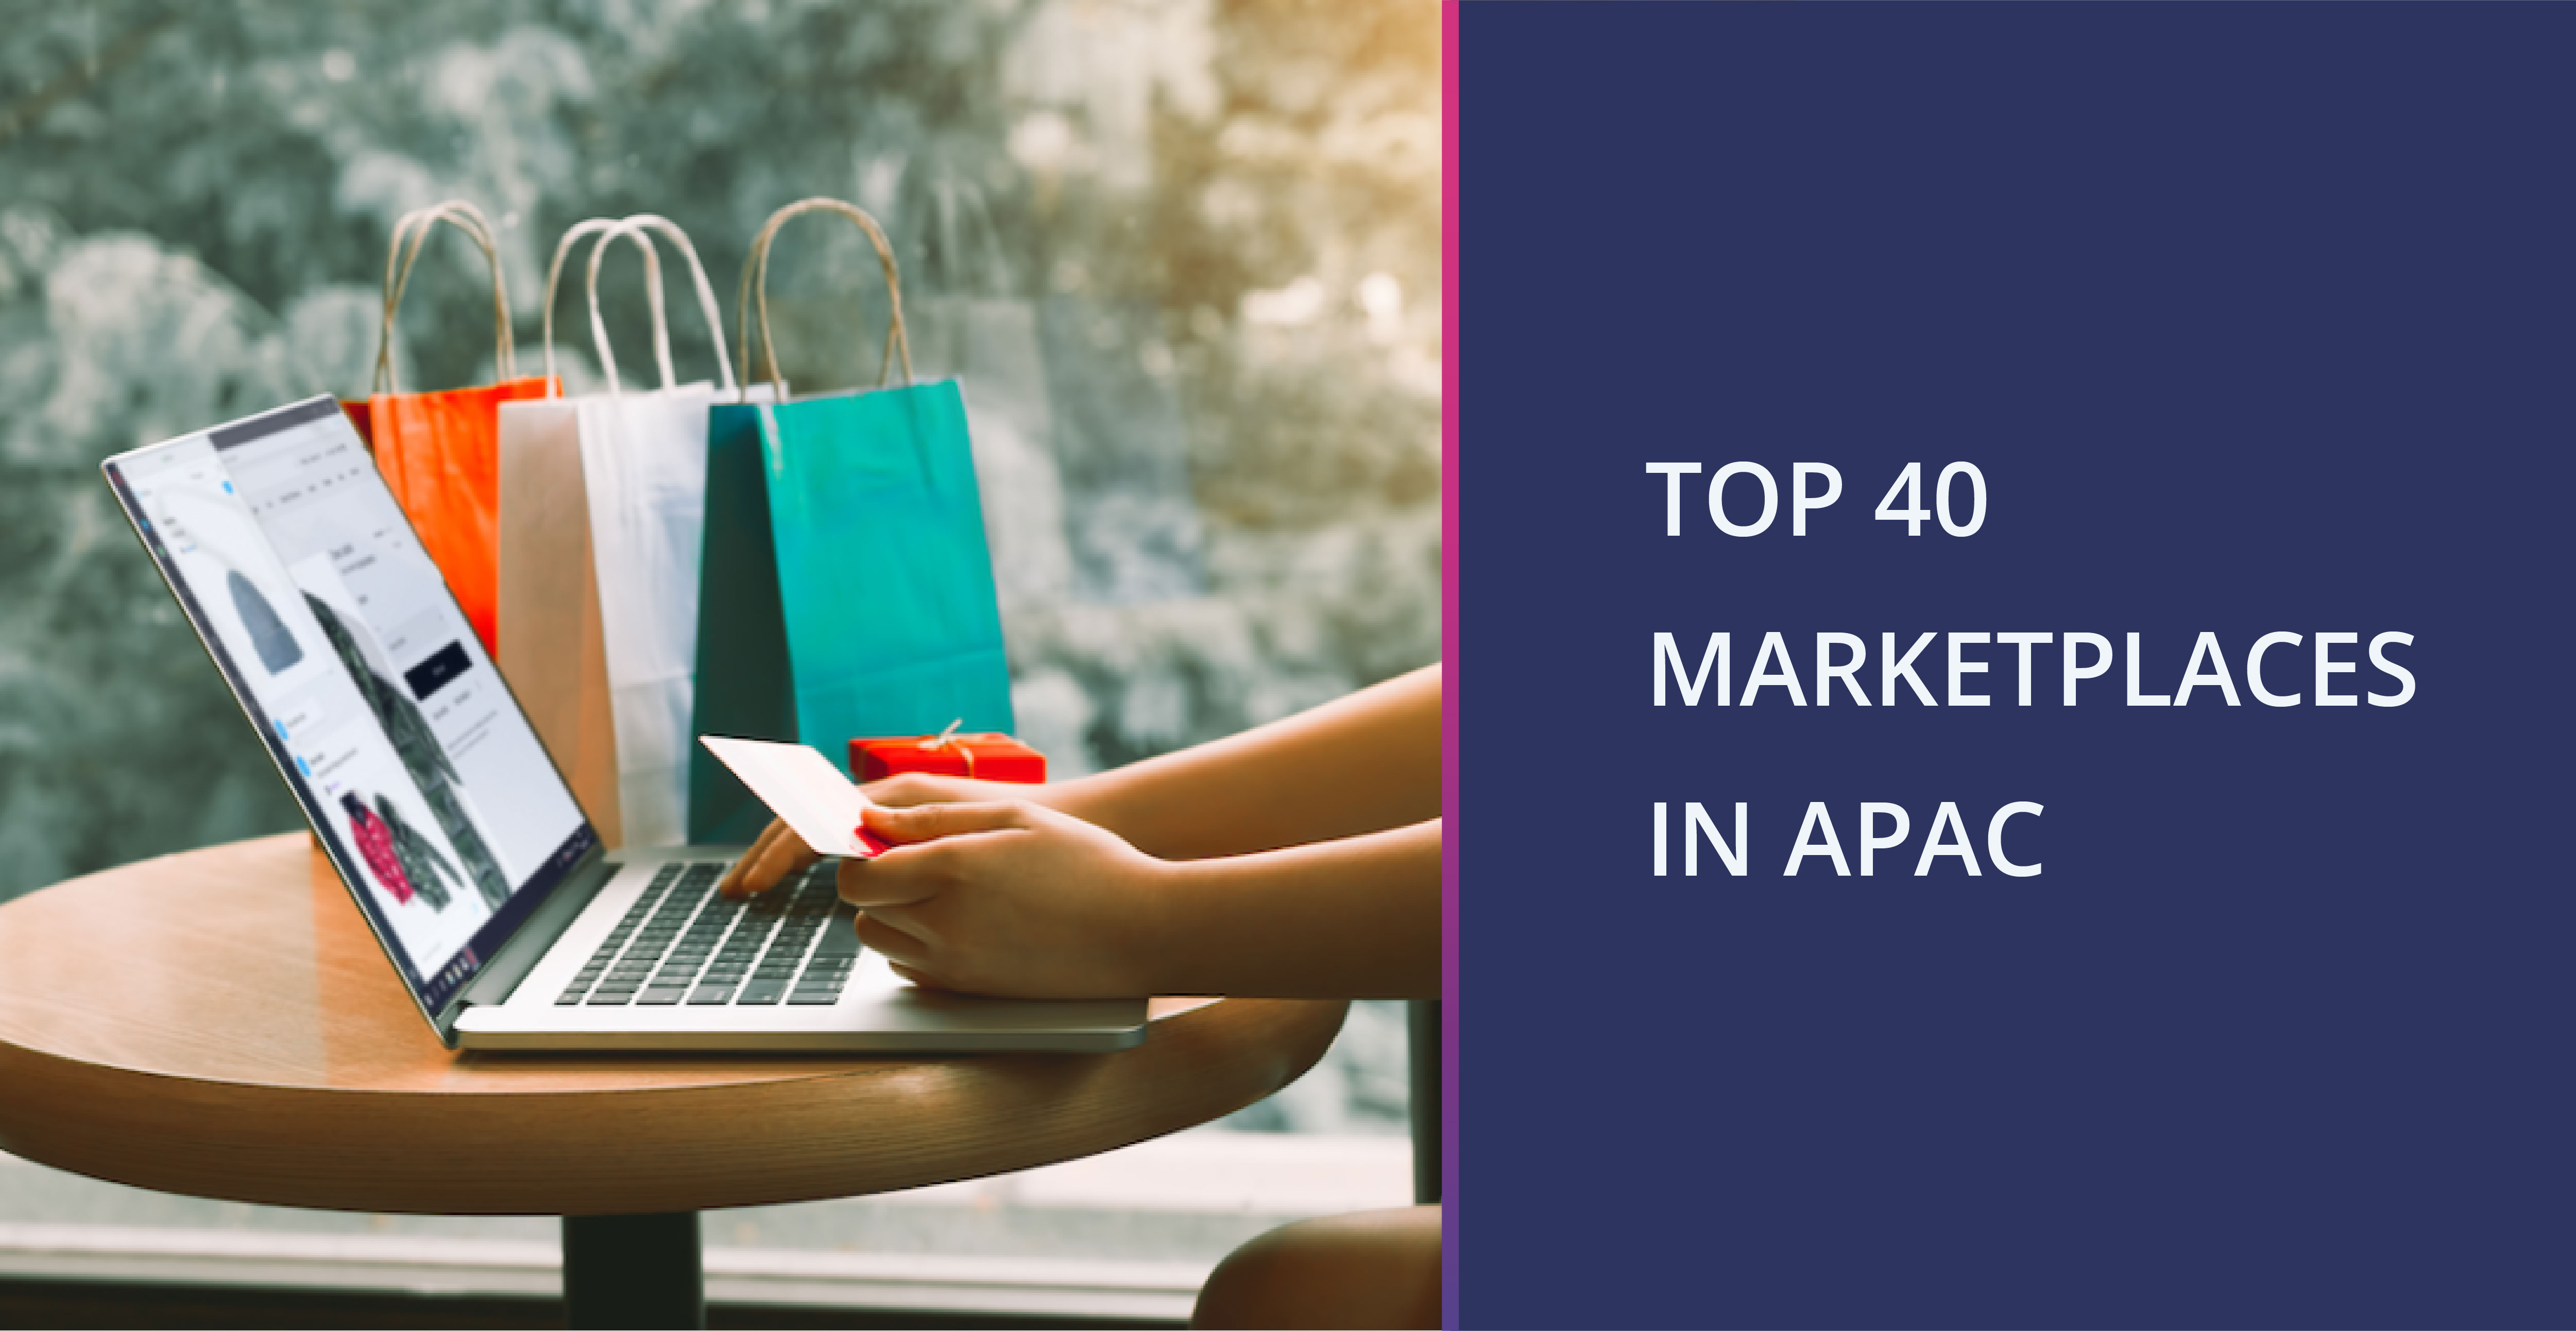 Top 40 Marketplaces in APAC